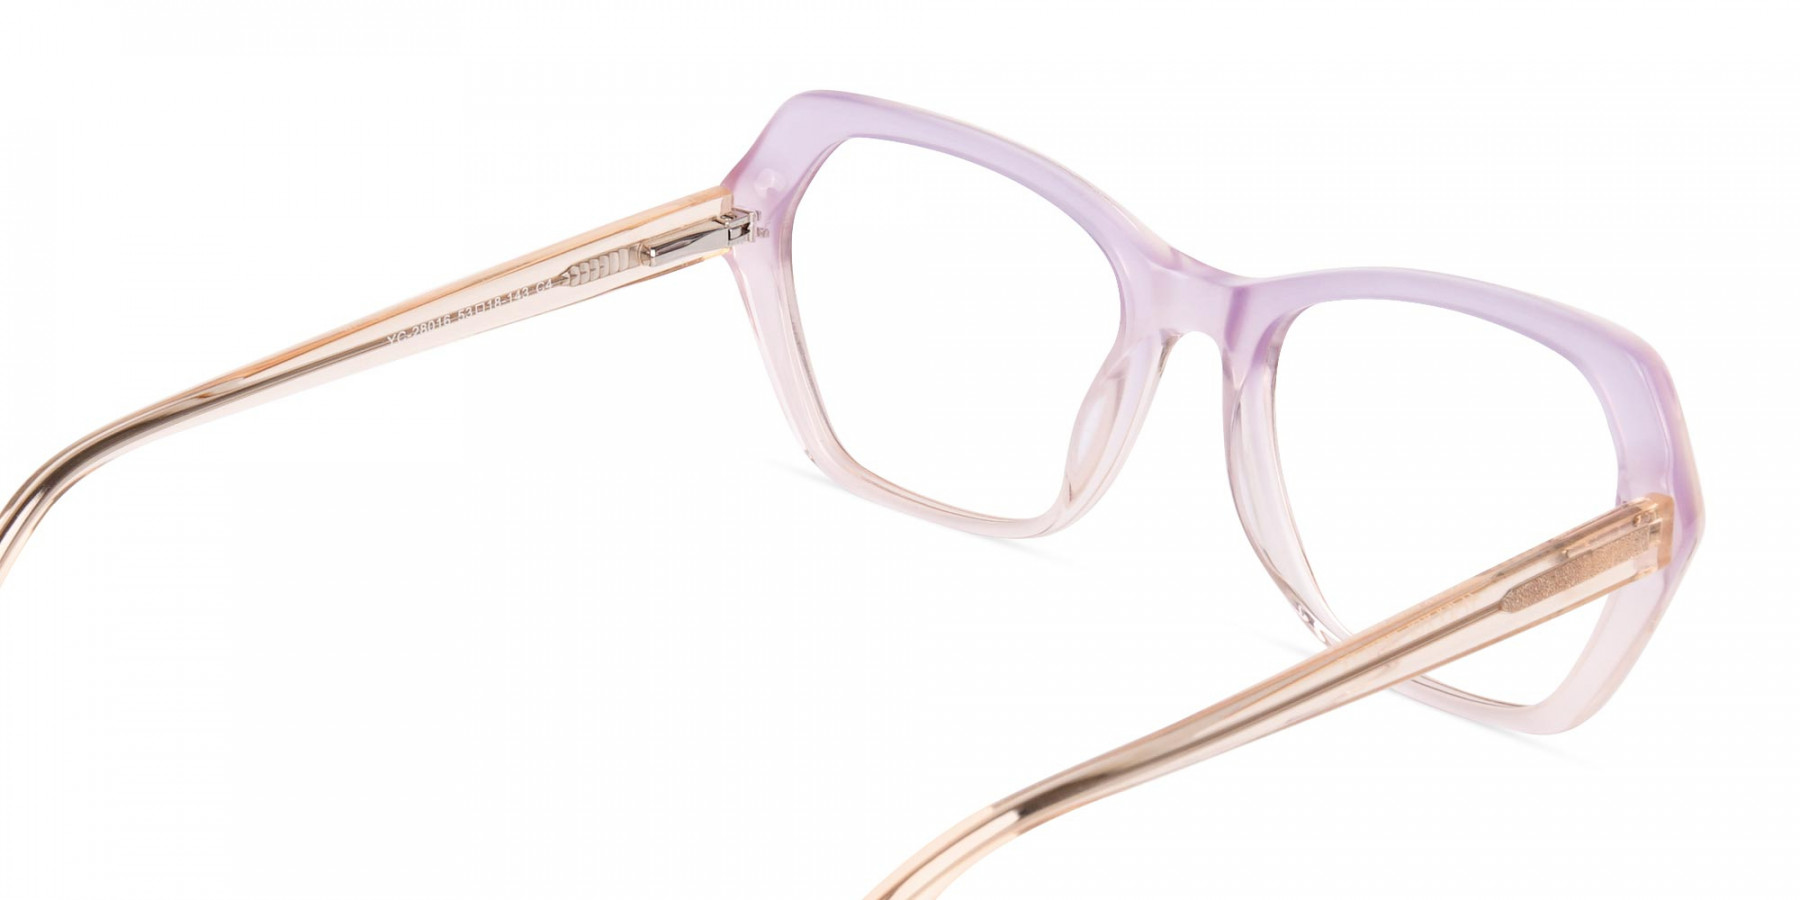 Crystal-Purple-and-Nude-Cat-Eye-Glasses-1